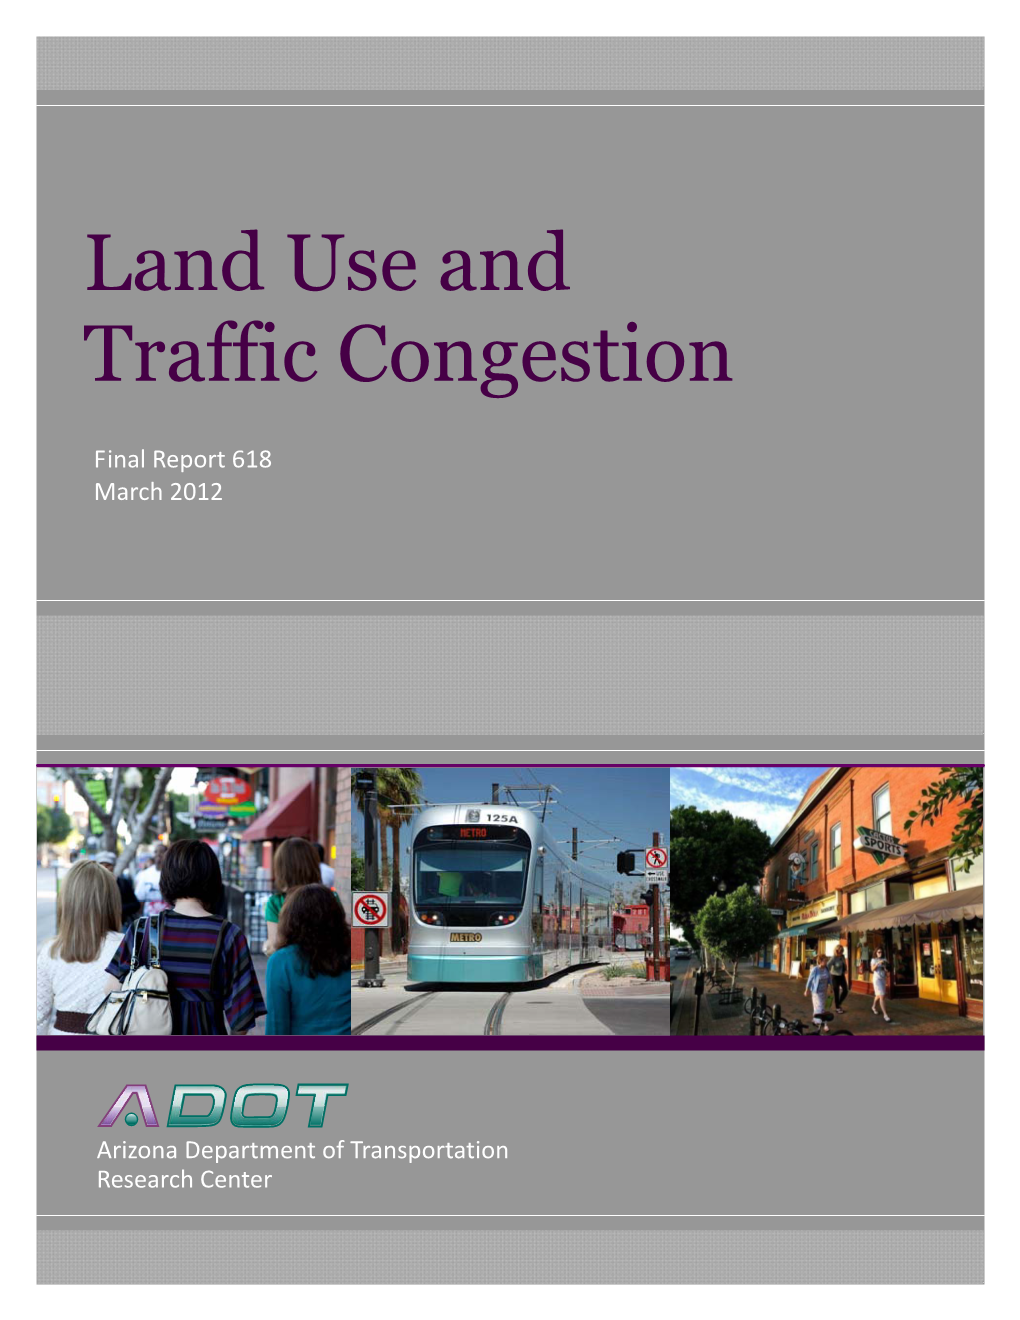 Land Use and Traffic Congestion